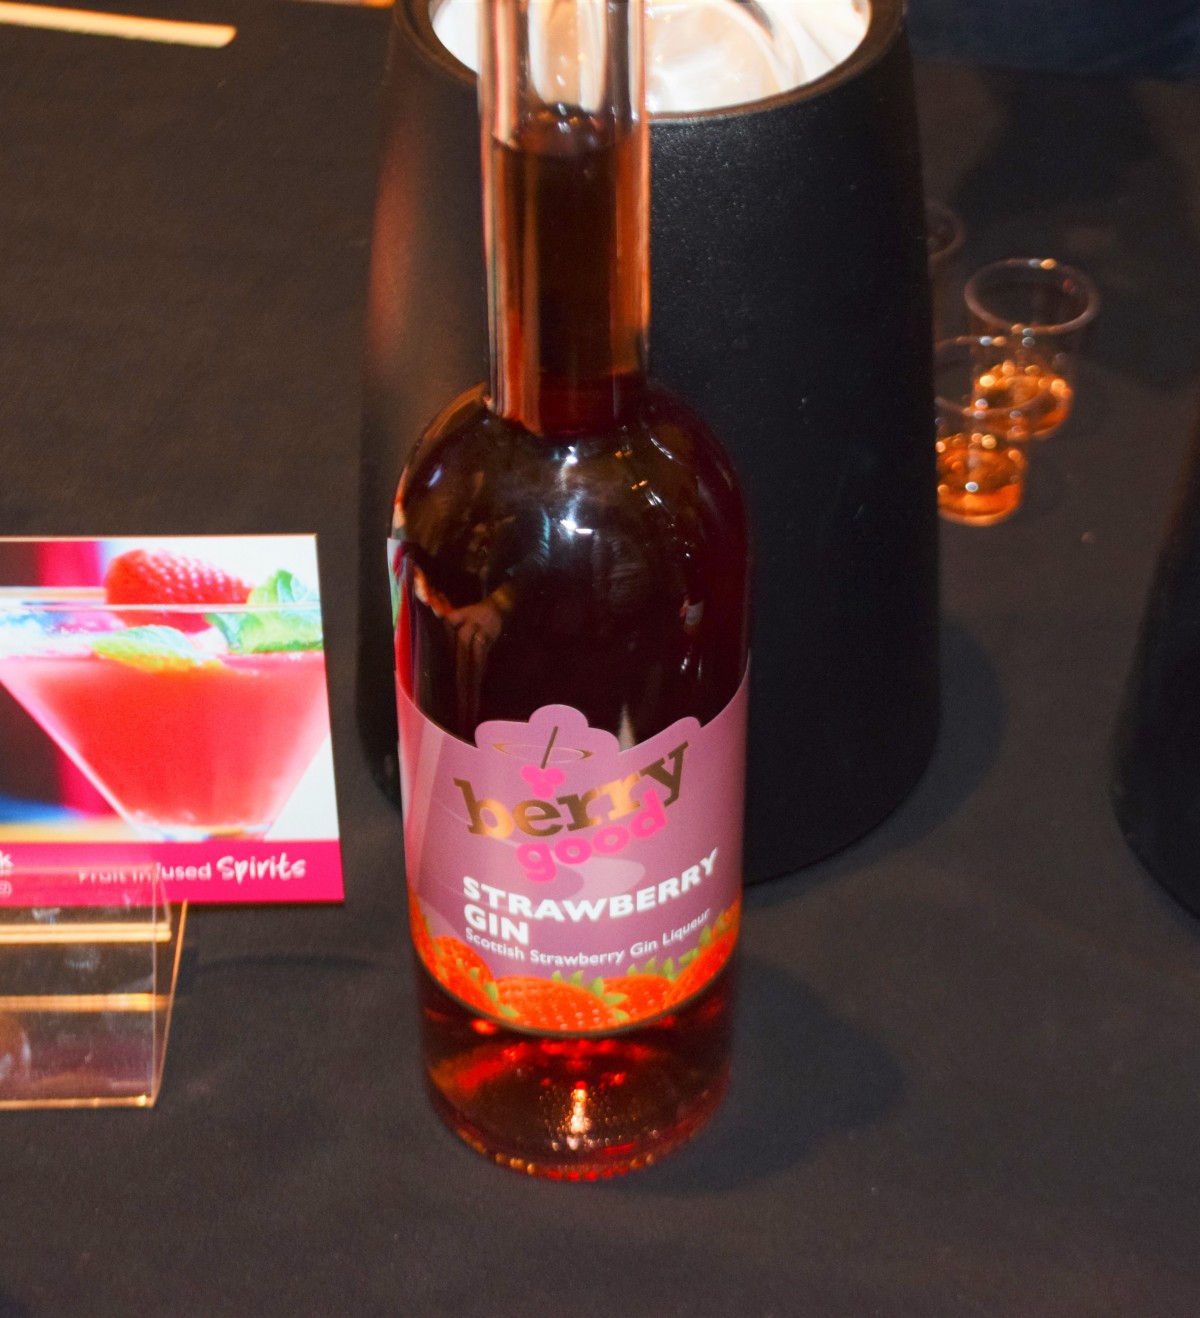 This berry good strawberry gin was fresh, fruity and sweet.  You could also get raspberry flavour too!